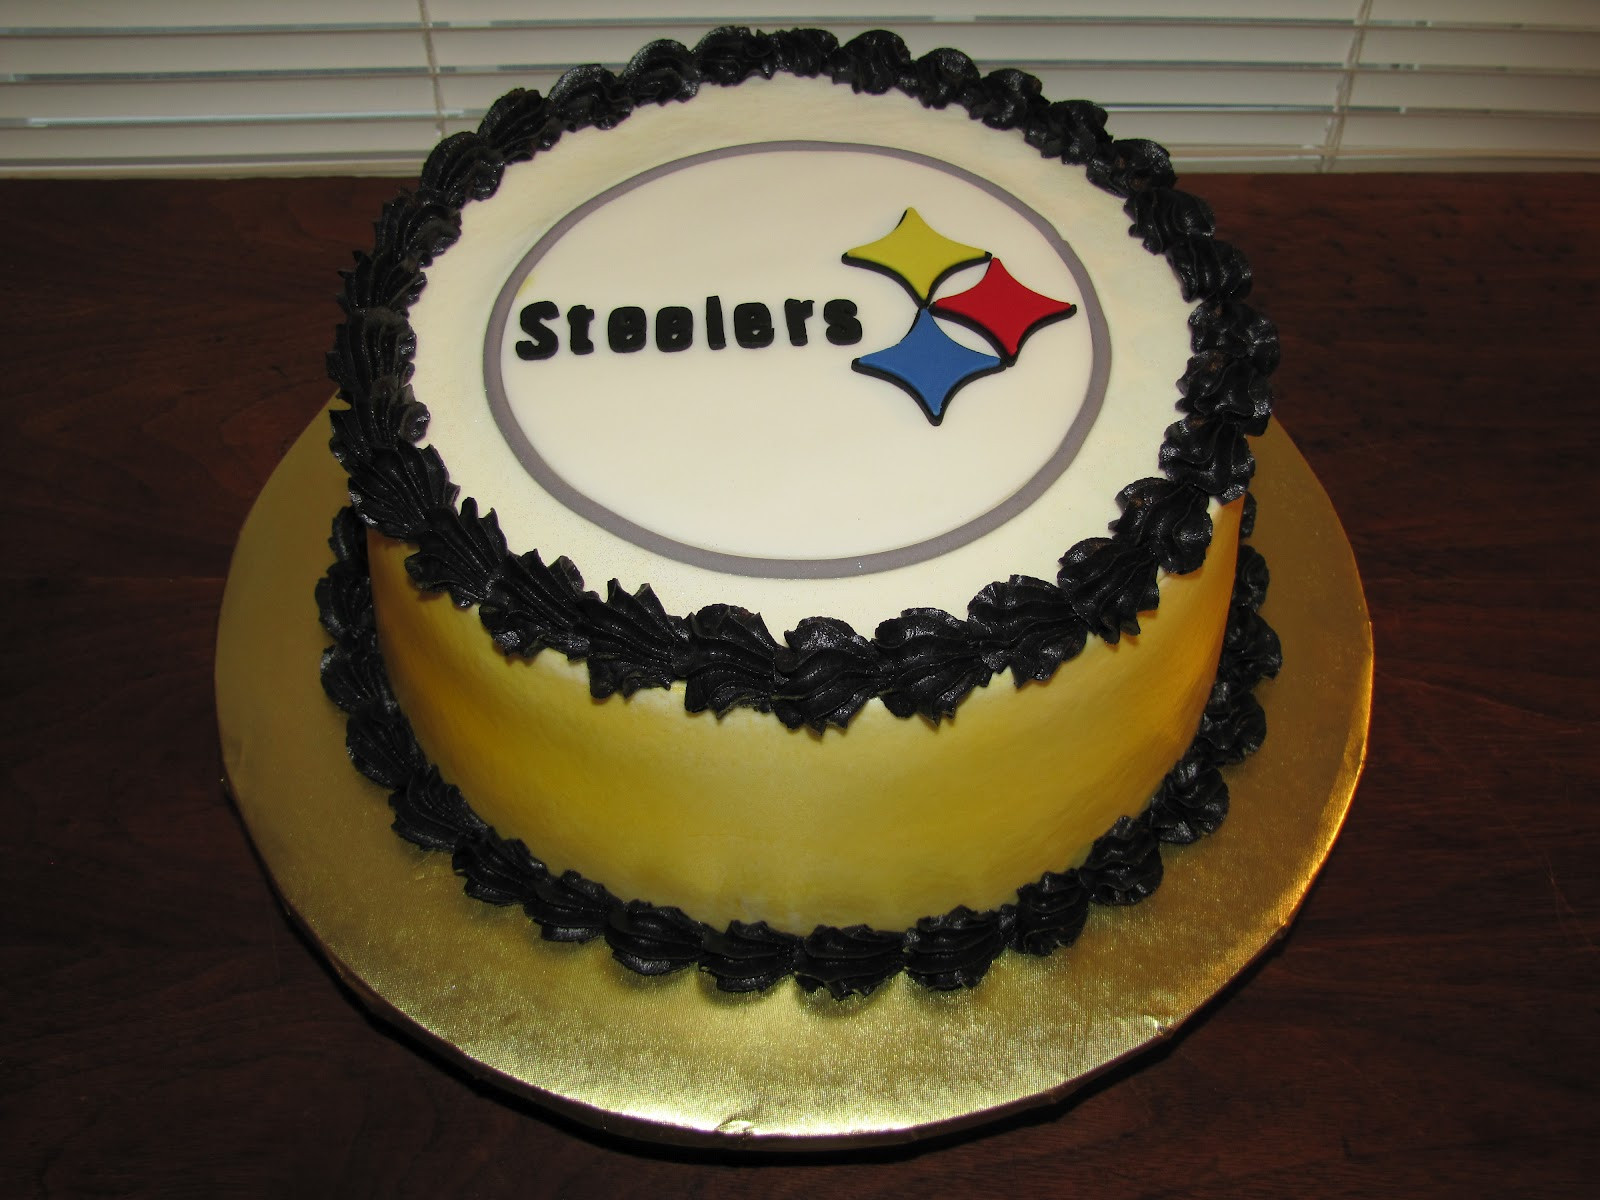 Steelers Wedding Cakes
 Steelers Wedding Cake Ideas and Designs